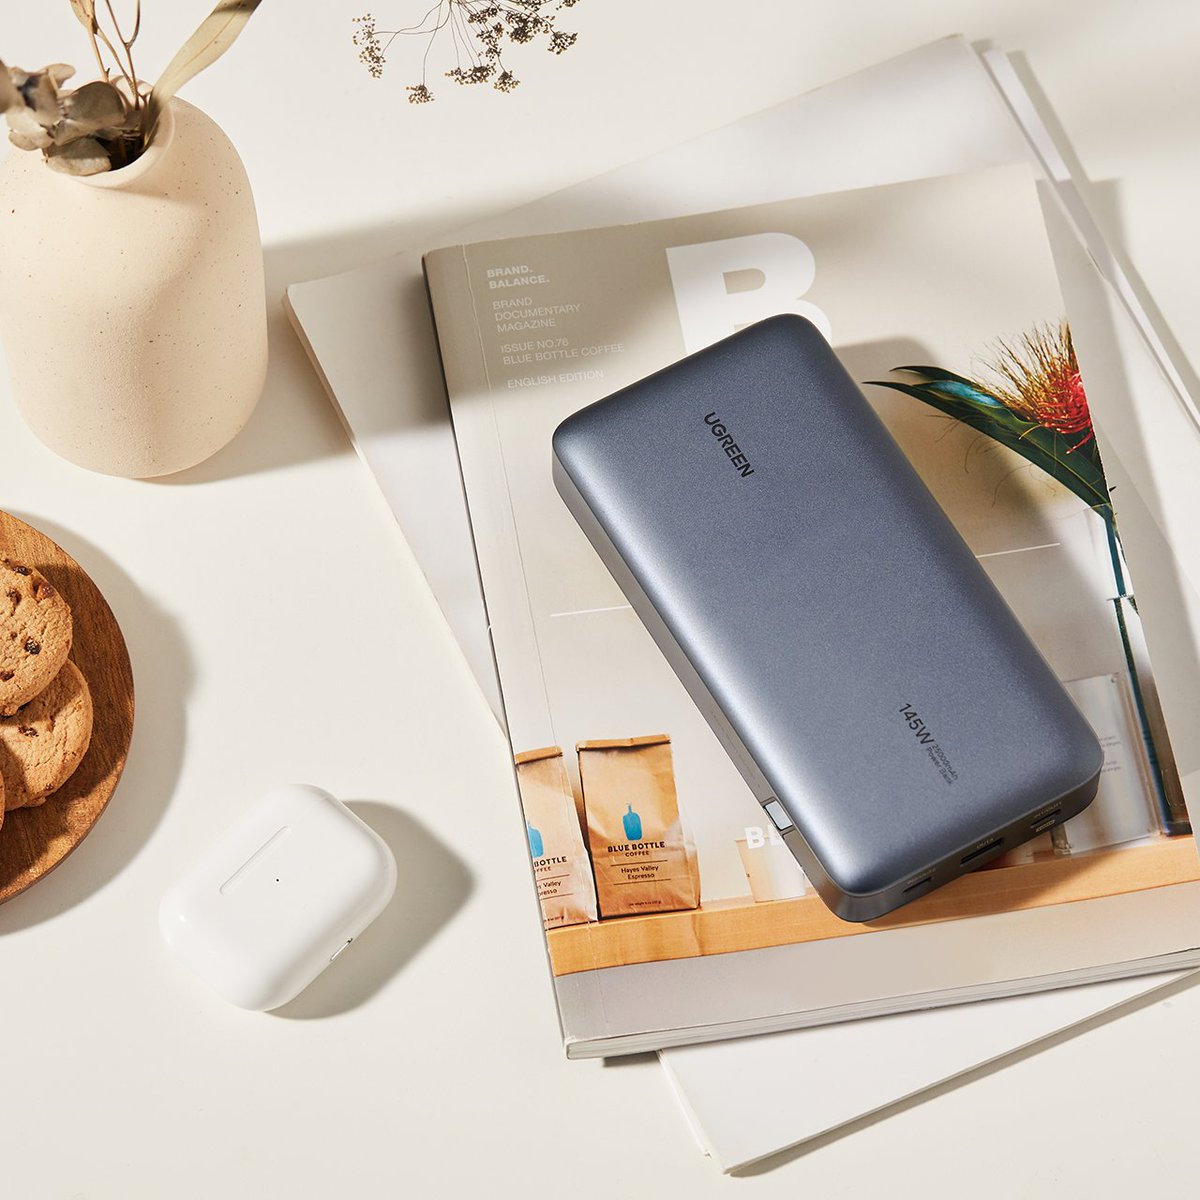 If you've always wished your power bank could charge more than just your phone then you've got to meet Ugreen's new 145W power bank, which has enough juice to charge your MacBook and then some
🔗bitly.ws/DDok
#ugreen #powerbank #charger